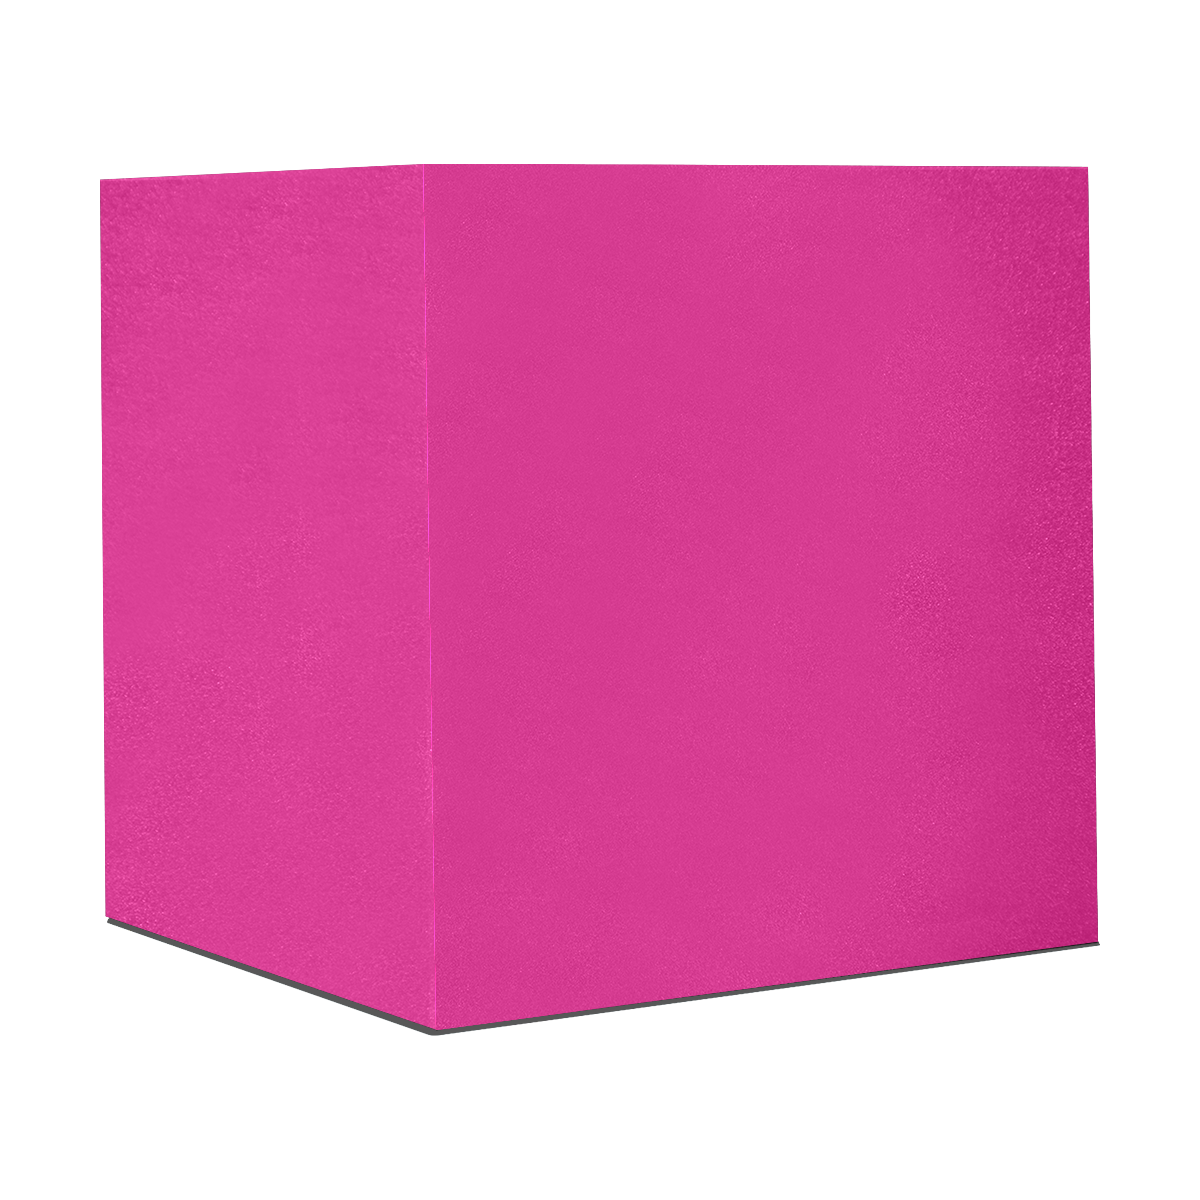 color Barbie pink Gift Wrapping Paper 58"x 23" (1 Roll)